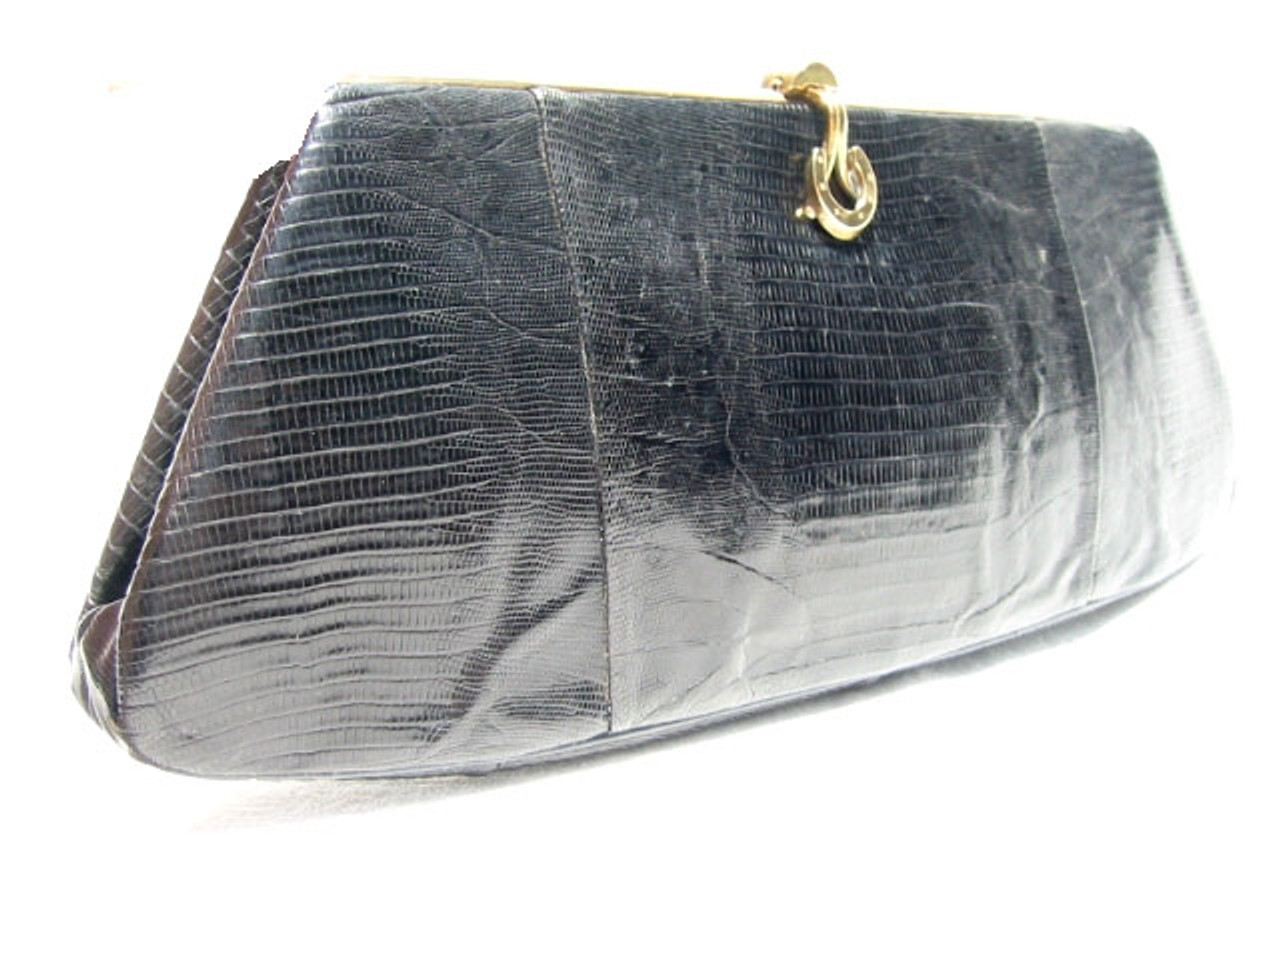 Original 1940s 1950s Whiting and Davis Clutch Purse in Silver with Cle –  1940s Style For You